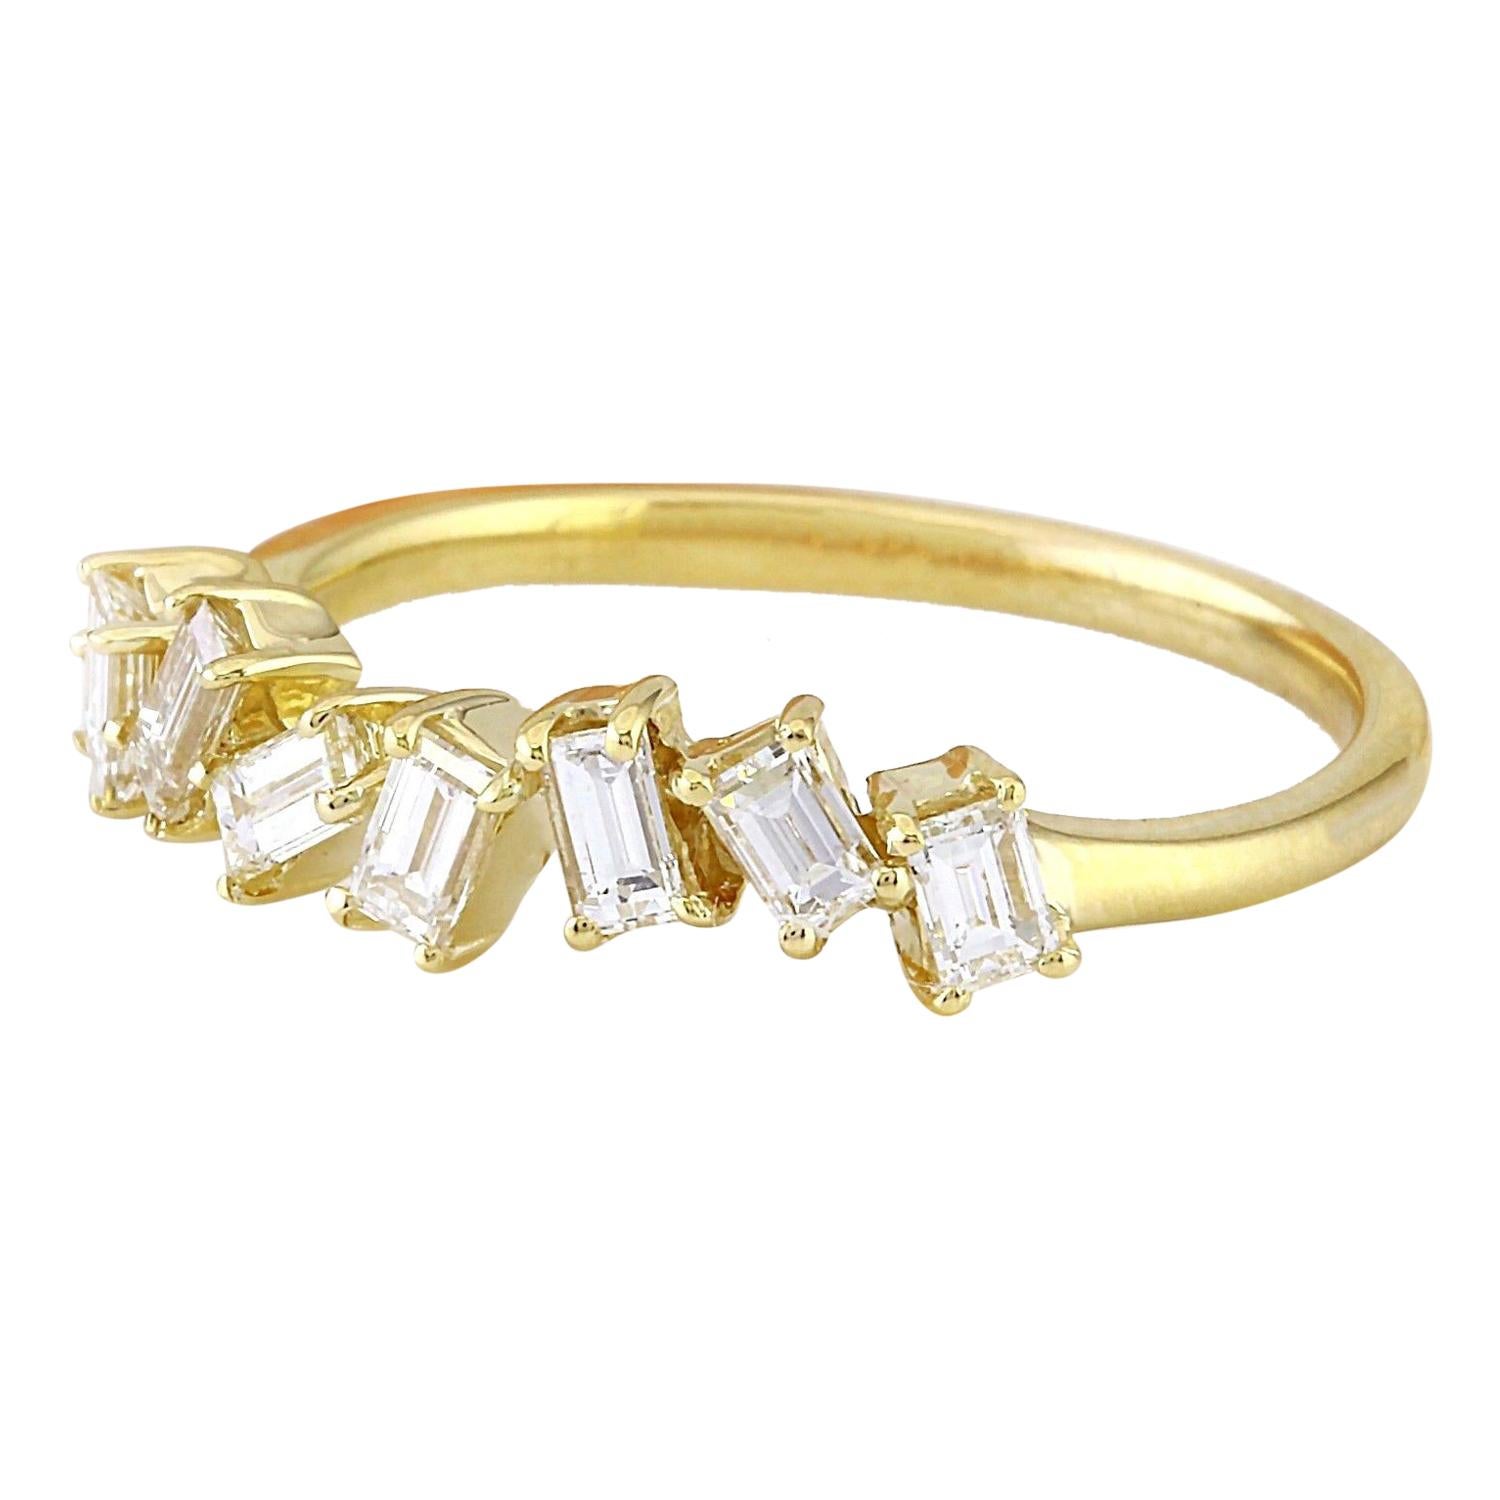 Introducing our elegant 14K Solid Yellow Gold Ring featuring a dazzling 0.75 Carat Natural Diamond as the mainstone. Crafted with meticulous attention to detail, this ring exudes sophistication and charm. The diamond boasts a pristine F-G color and